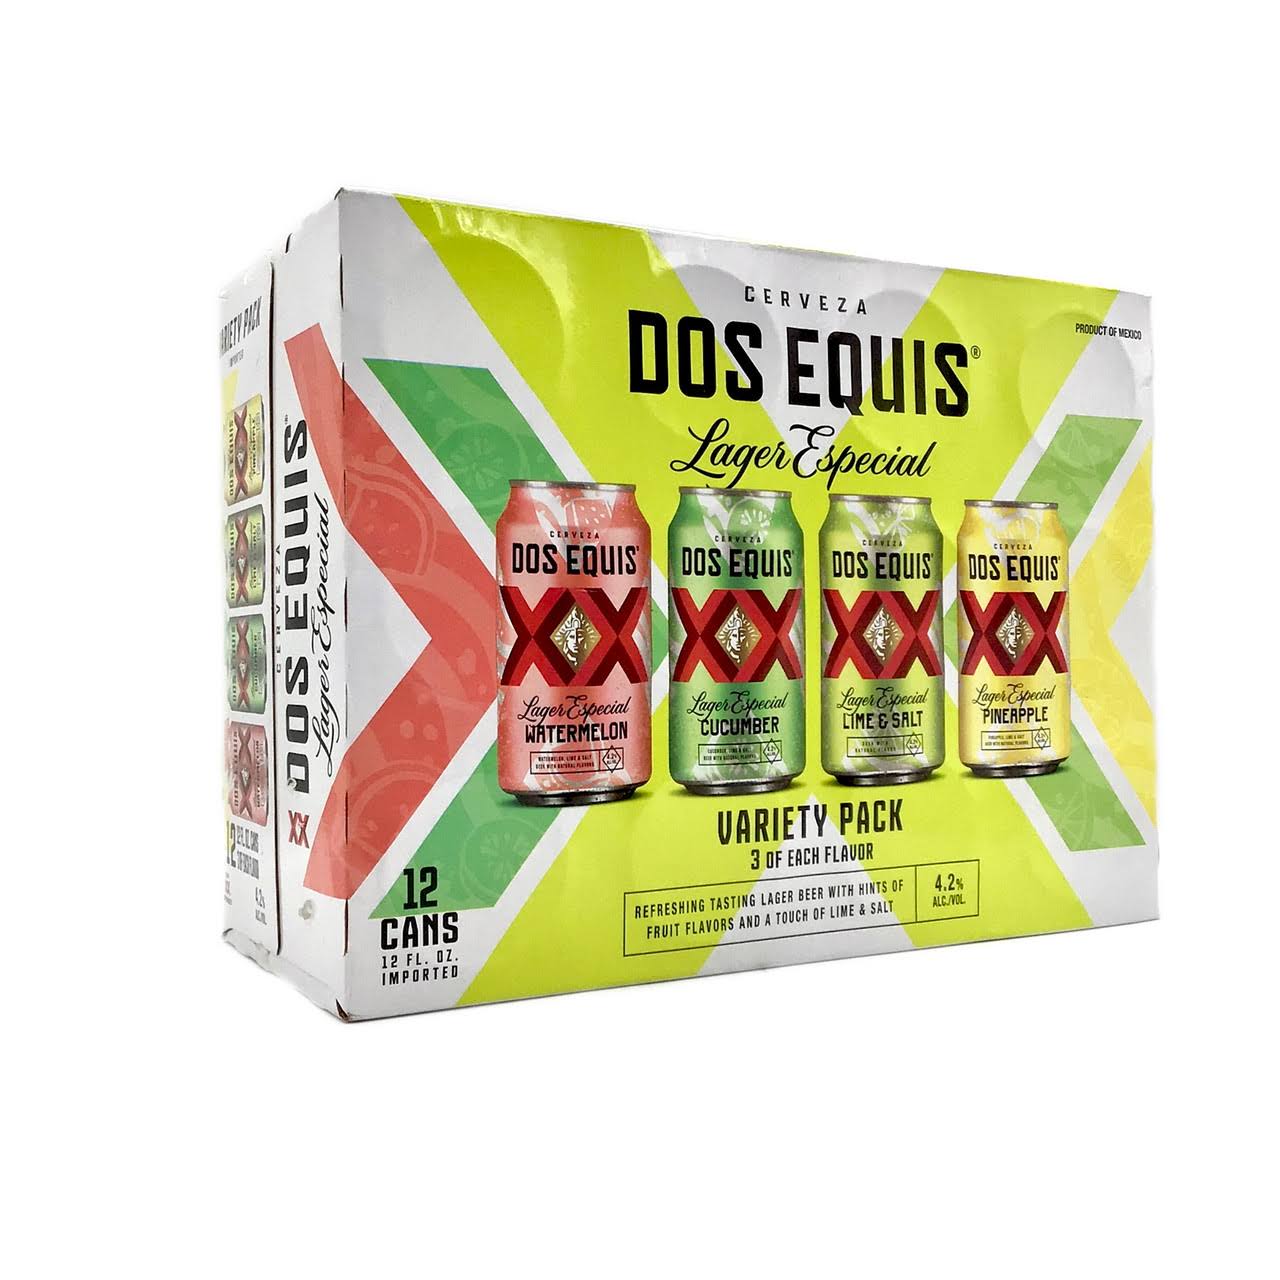 Dos Equis Beer, Lager Especial, Variety Pack - 12 pack, 12 fl oz cans